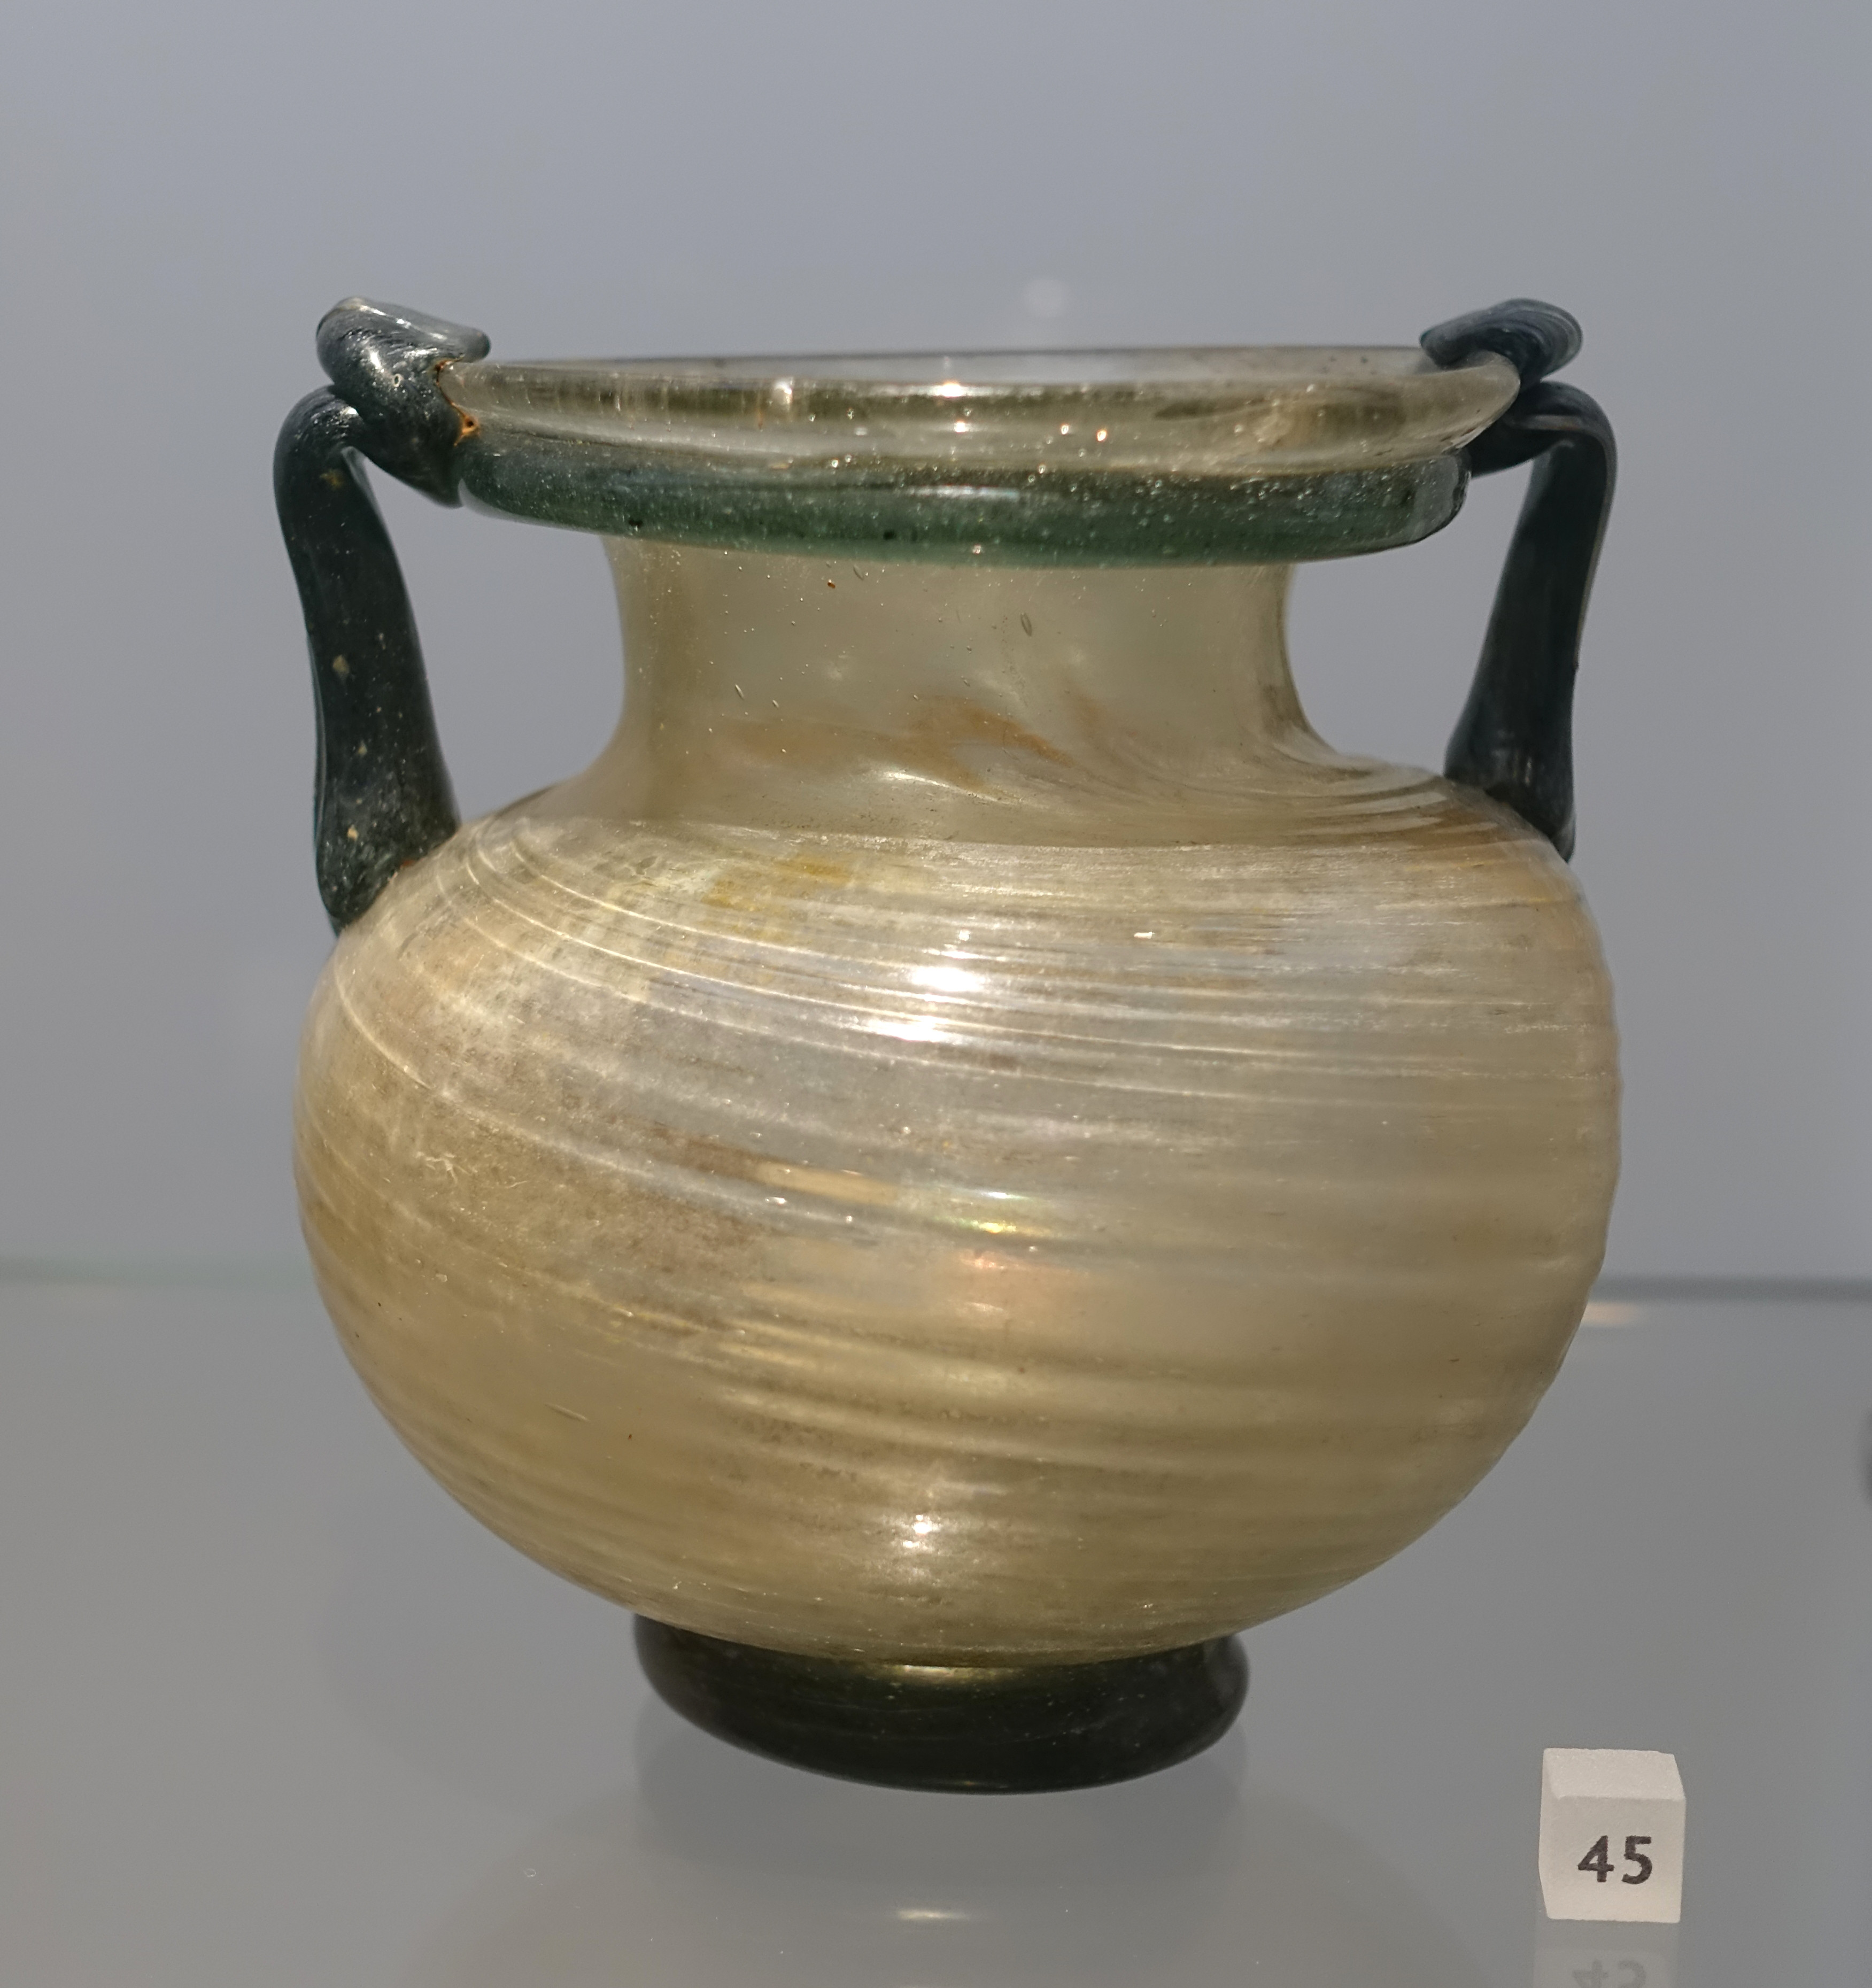 16 Perfect Glass Vase with Handle 2024 free download glass vase with handle of filetwo handled vessel syria probably 4th century ad glass intended for filetwo handled vessel syria probably 4th century ad glass